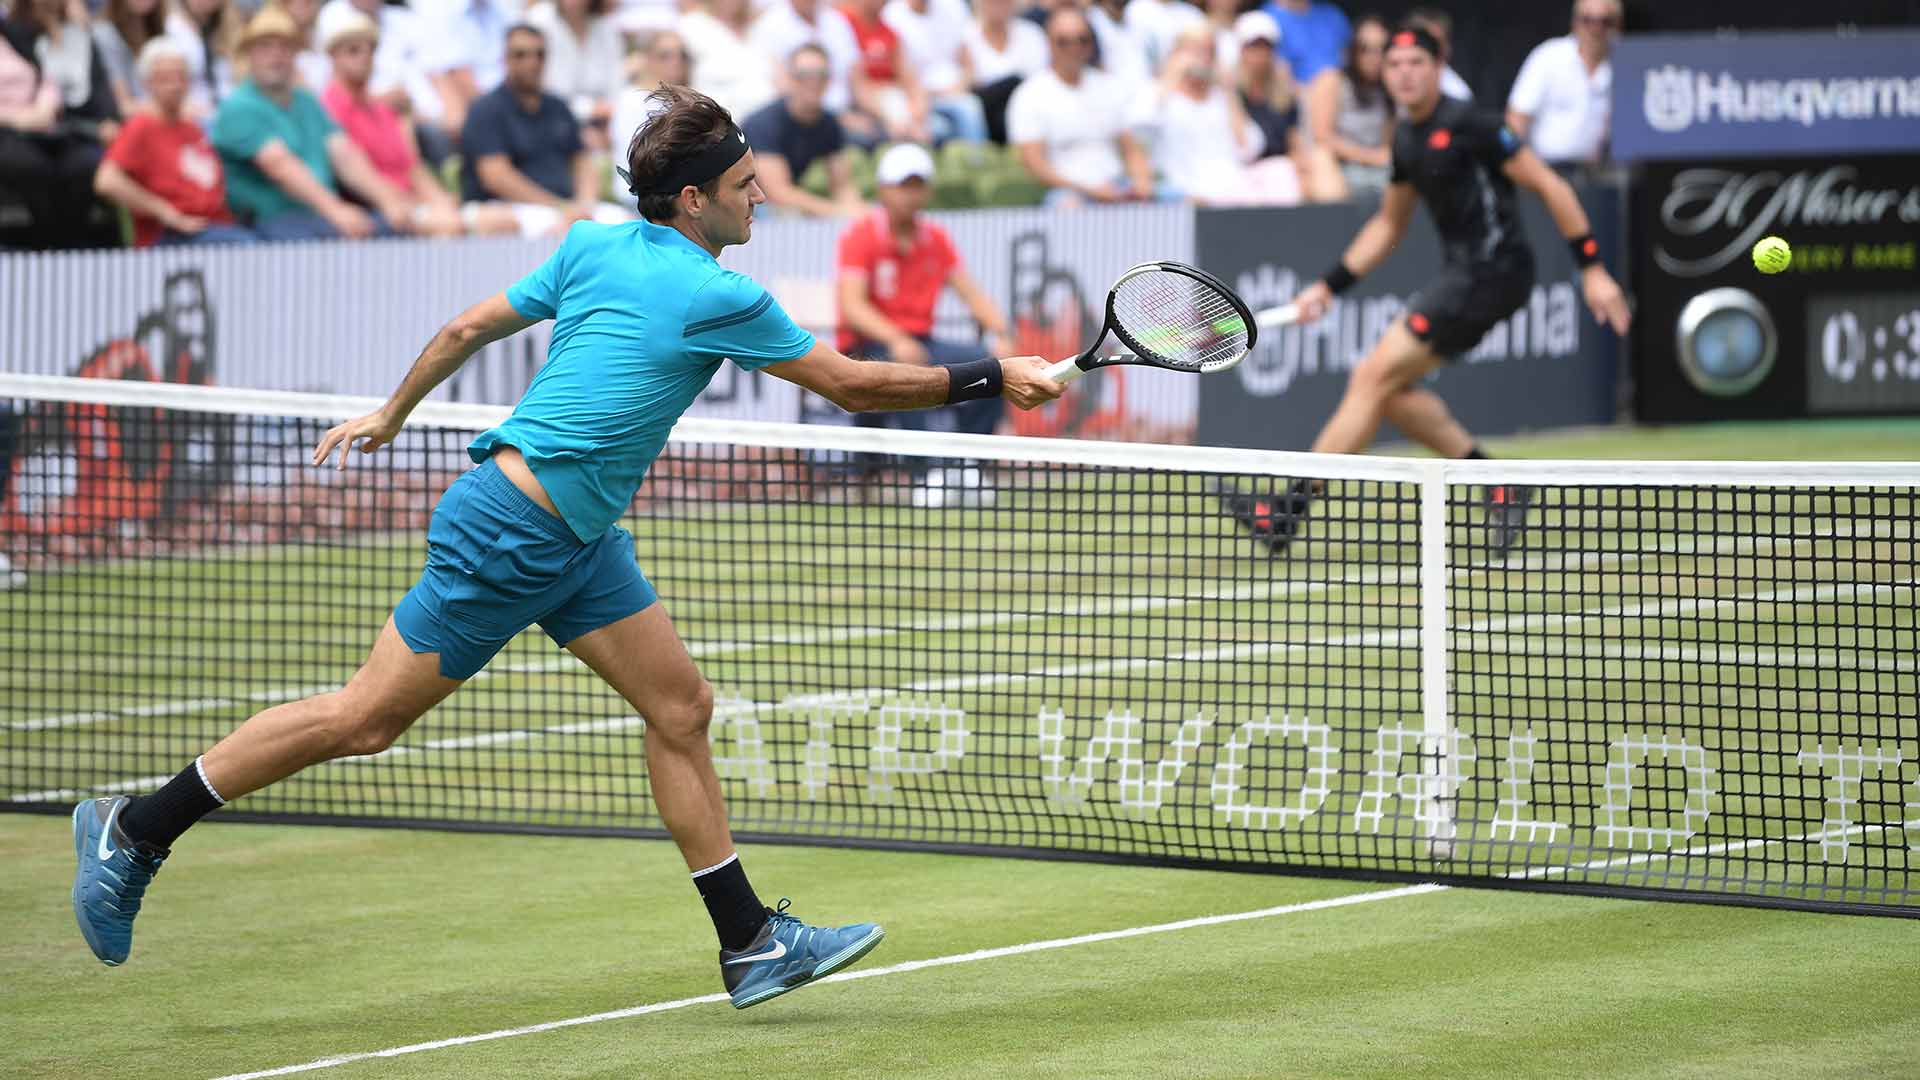 Roger Federer defeats Milos Raonic in straight sets at the MercedesCup to earn his 18th grass-court trophy.